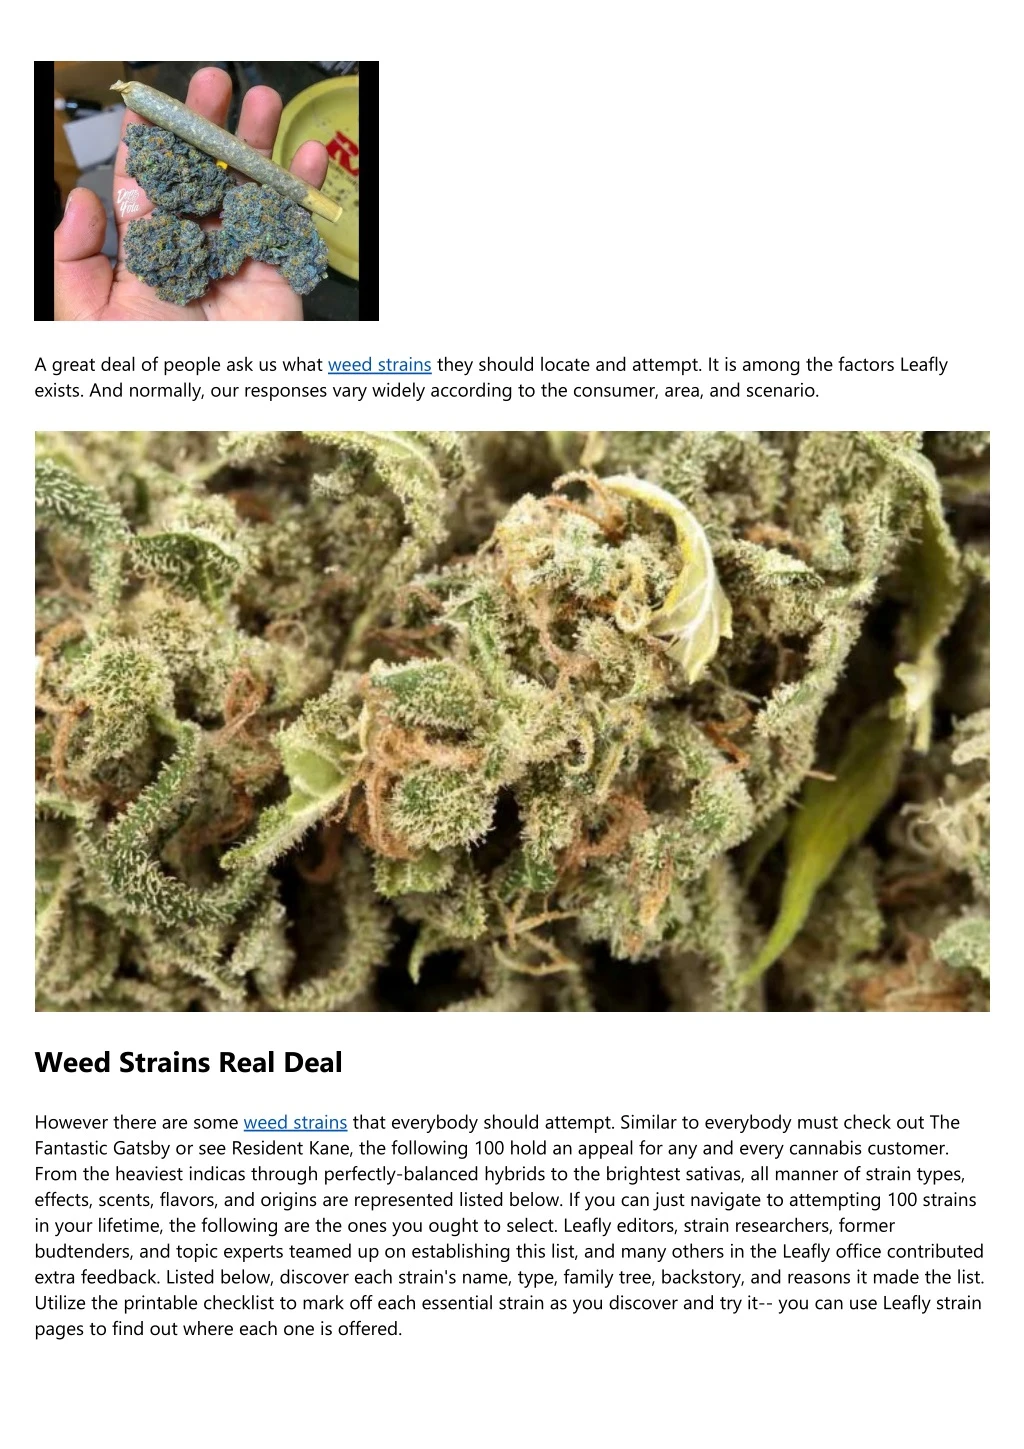 a great deal of people ask us what weed strains